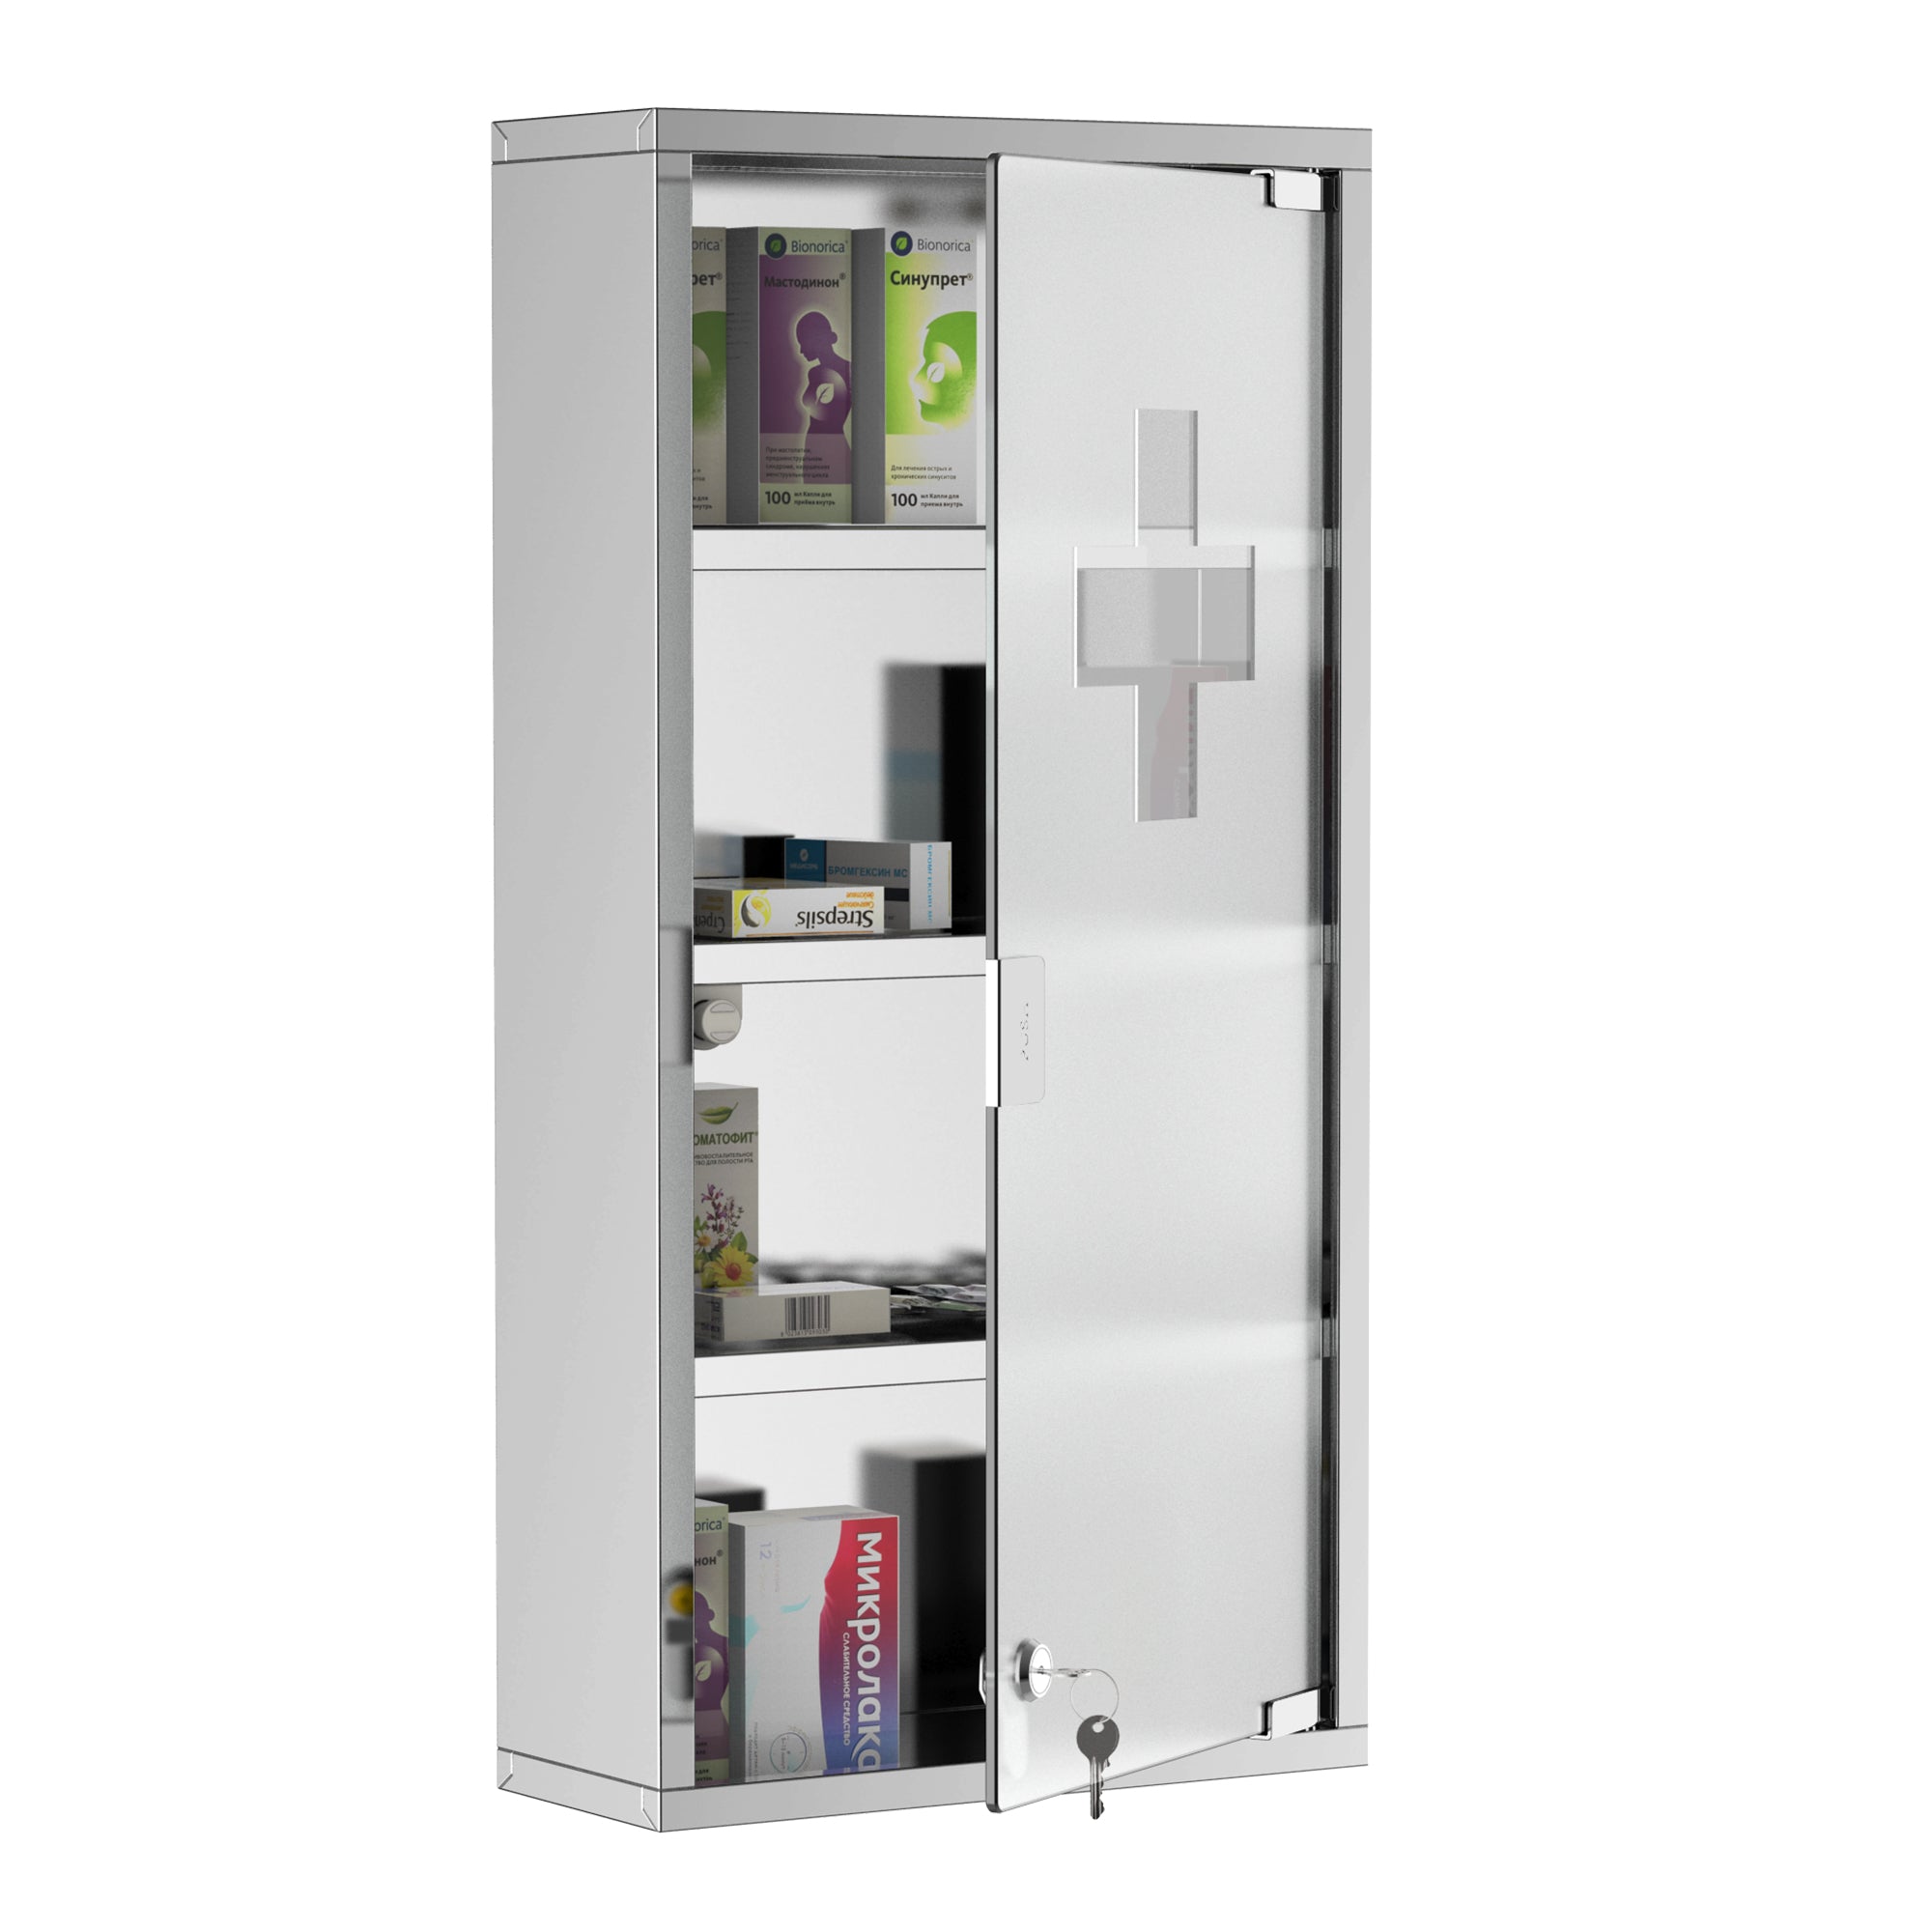 Wall Mount Medicine Cabinet, Bathroom Cabinet with 4 Tier Shelves, Stainless Steel Frame and Glass Door, Lockable with 2 Keys, Silver, 12